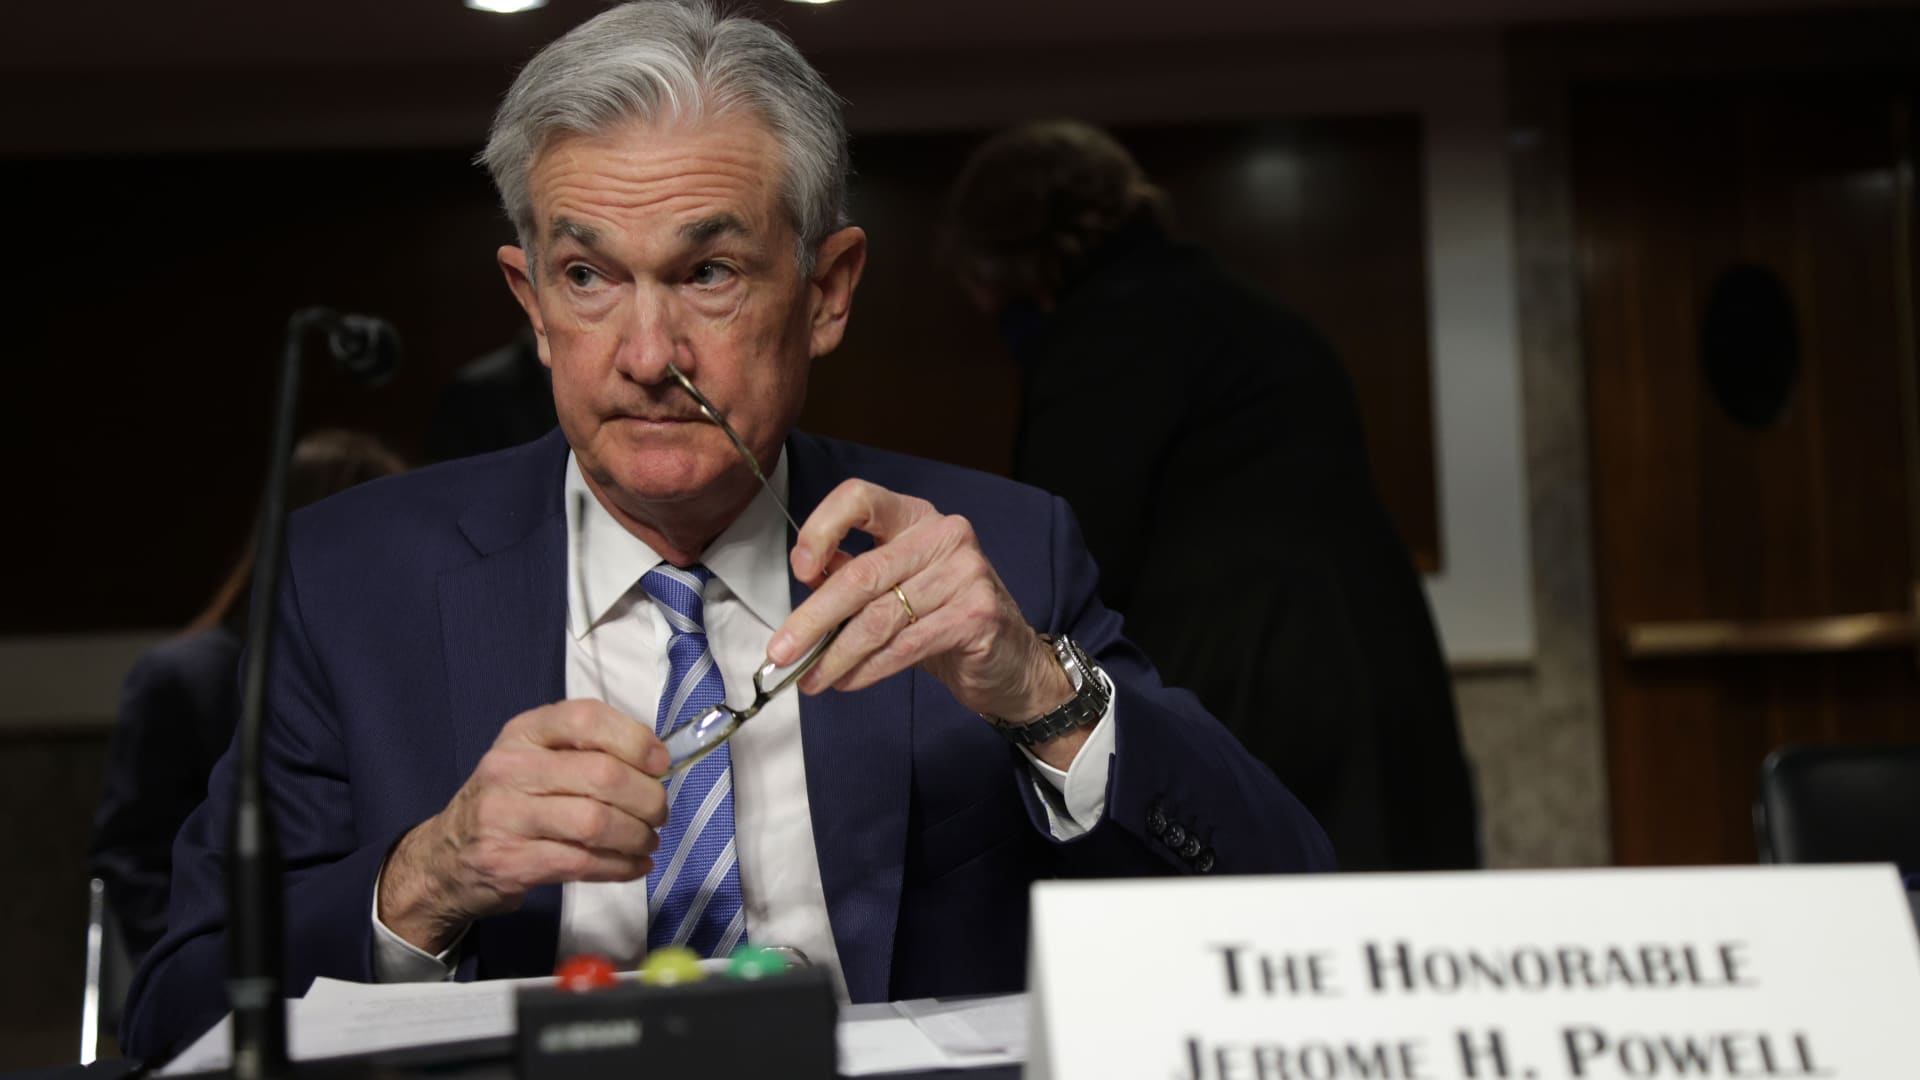 Federal Reserve Board Chairman Jerome Powell waits for the beginning of a hearing before Senate Banking, Housing and Urban Affairs Committee on Capitol Hill November 30, 2021 in Washington, DC.